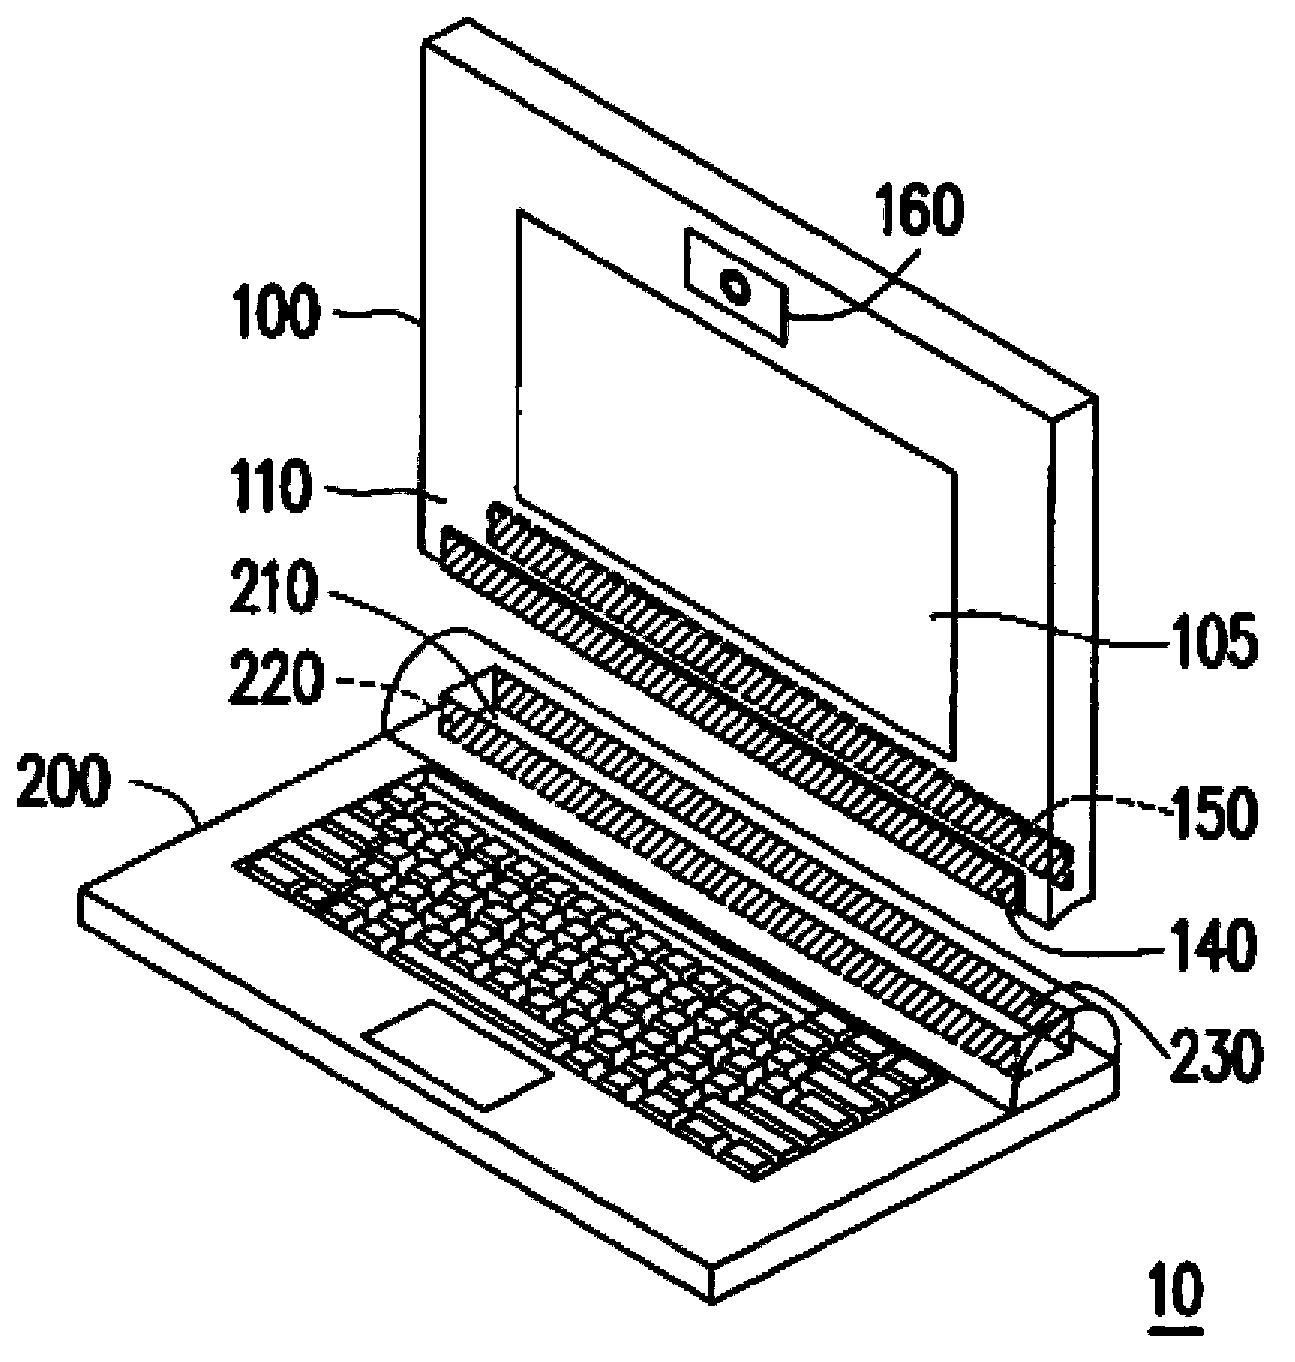 Liquid crystal display module and computer system